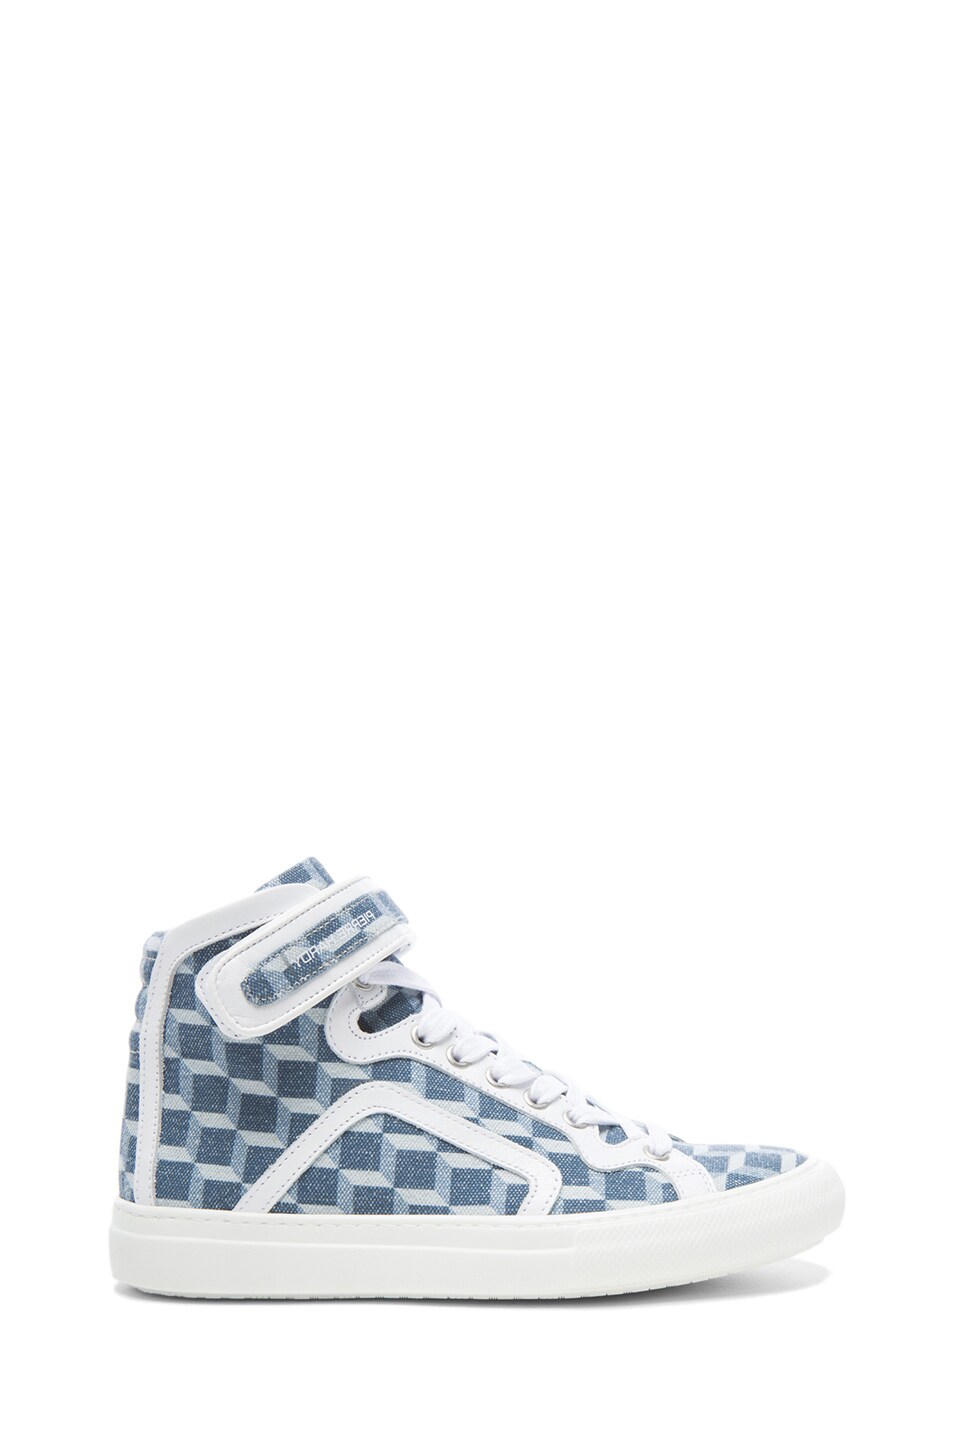 Image 1 of Pierre Hardy Hi Top Canvas & Nappa Leather Sneakers in Jeans & White